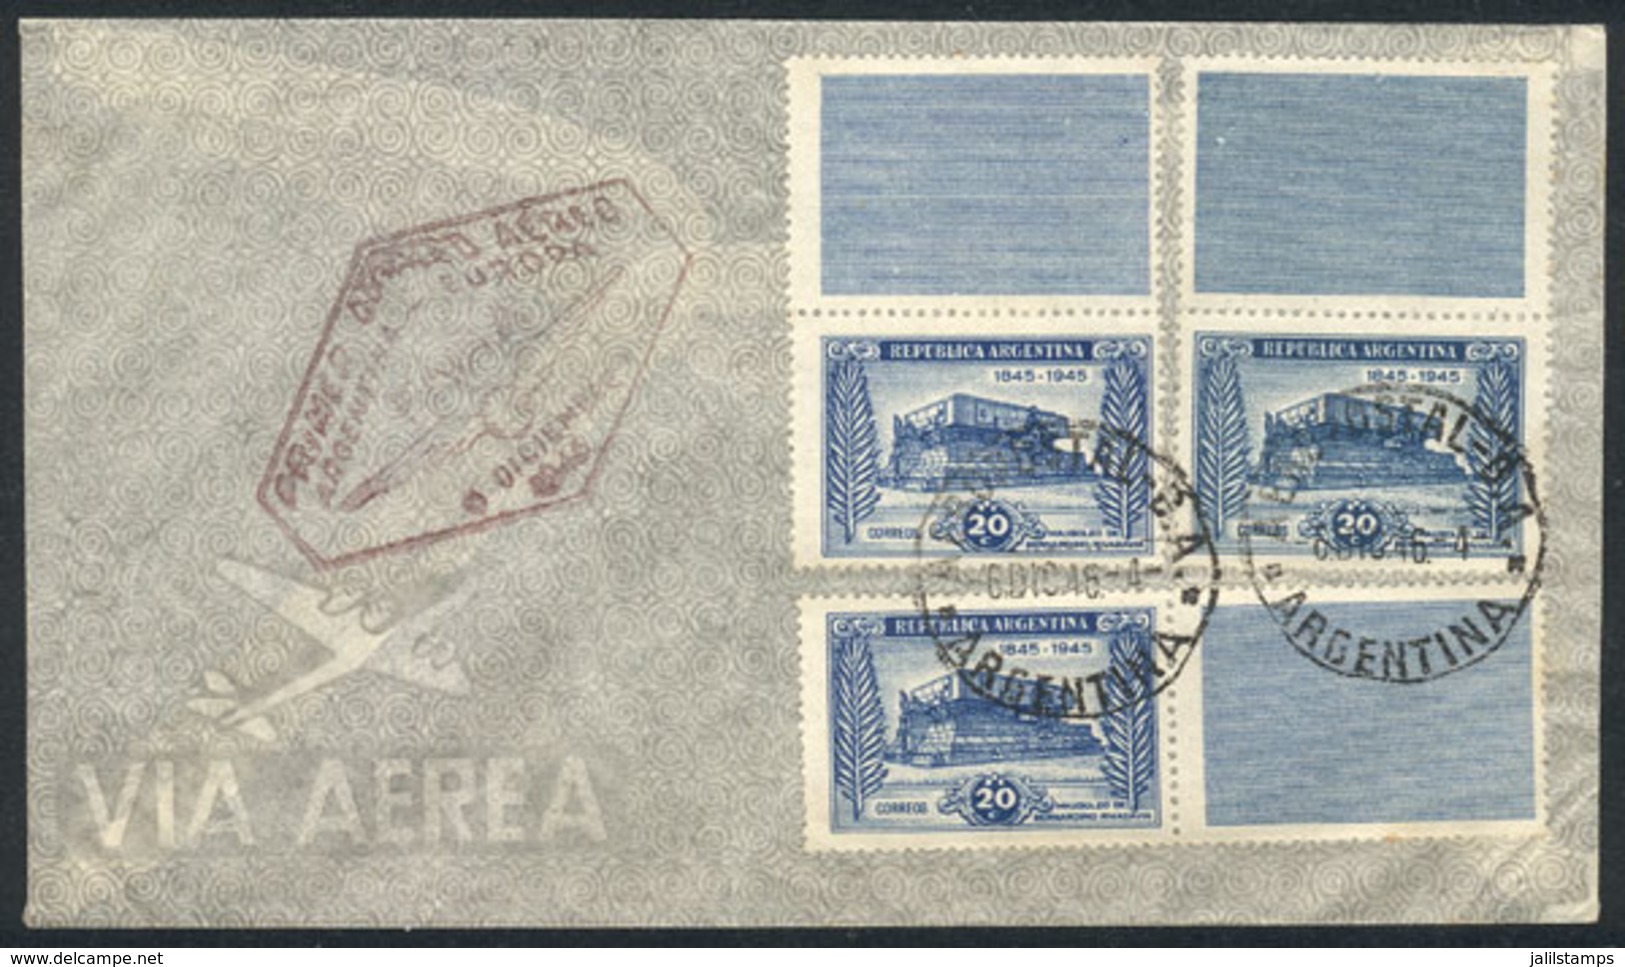 ARGENTINA: GJ.925CA + 925CD, 1945 Mausoleum Of Rivadavia 20c. With Labels At Top (2) And On The Right, On A Cover Flown  - Oblitérés